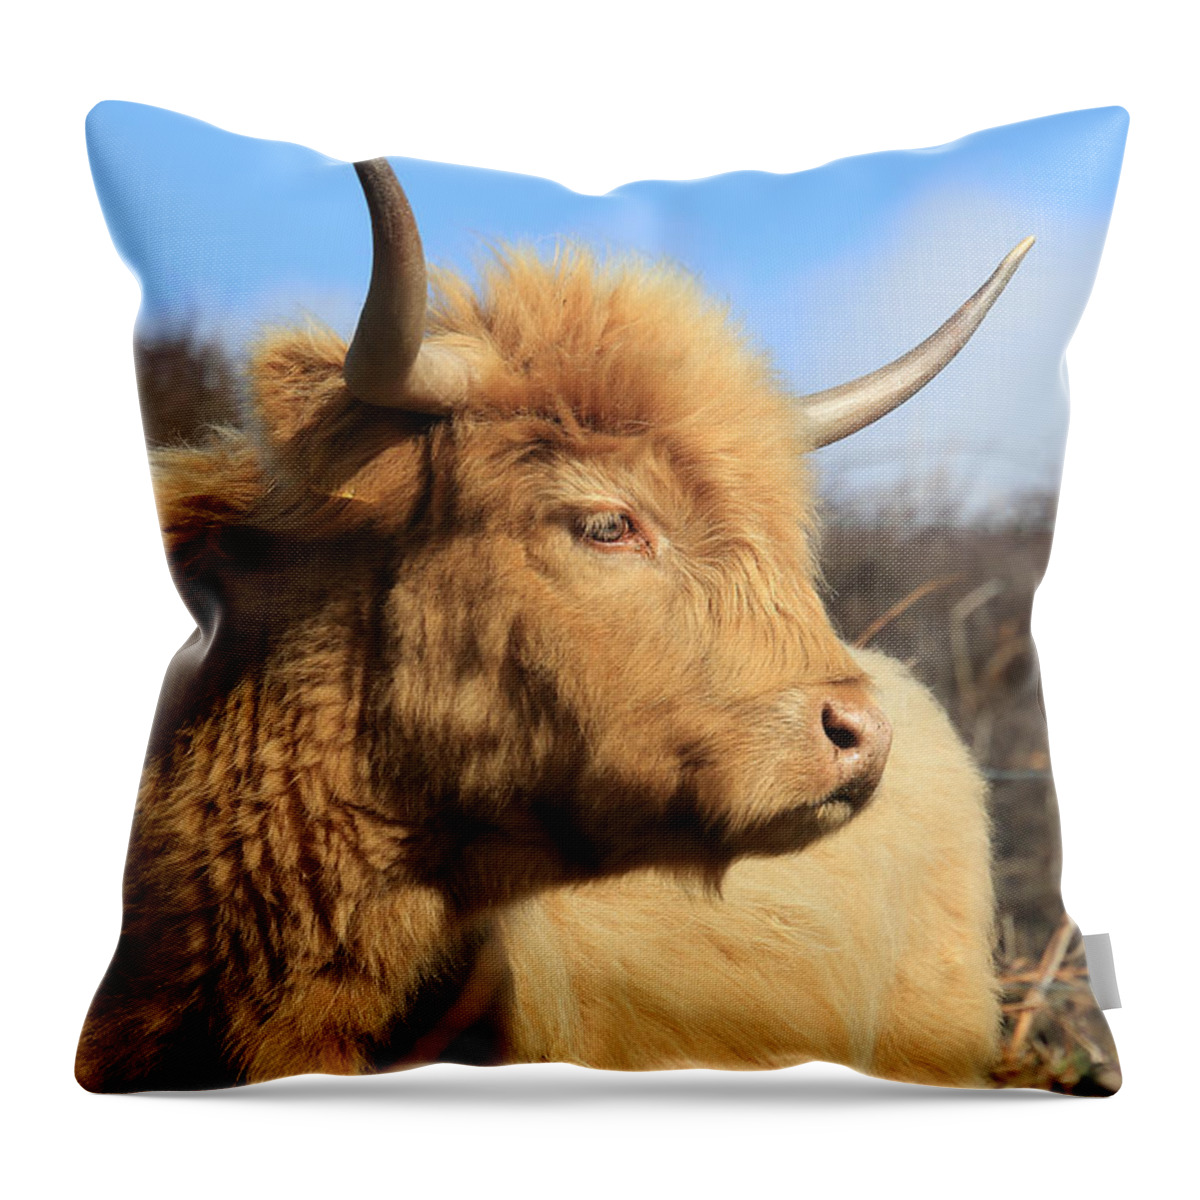 Highland Cattle Throw Pillow featuring the photograph Highland Cattle by Tony Mills